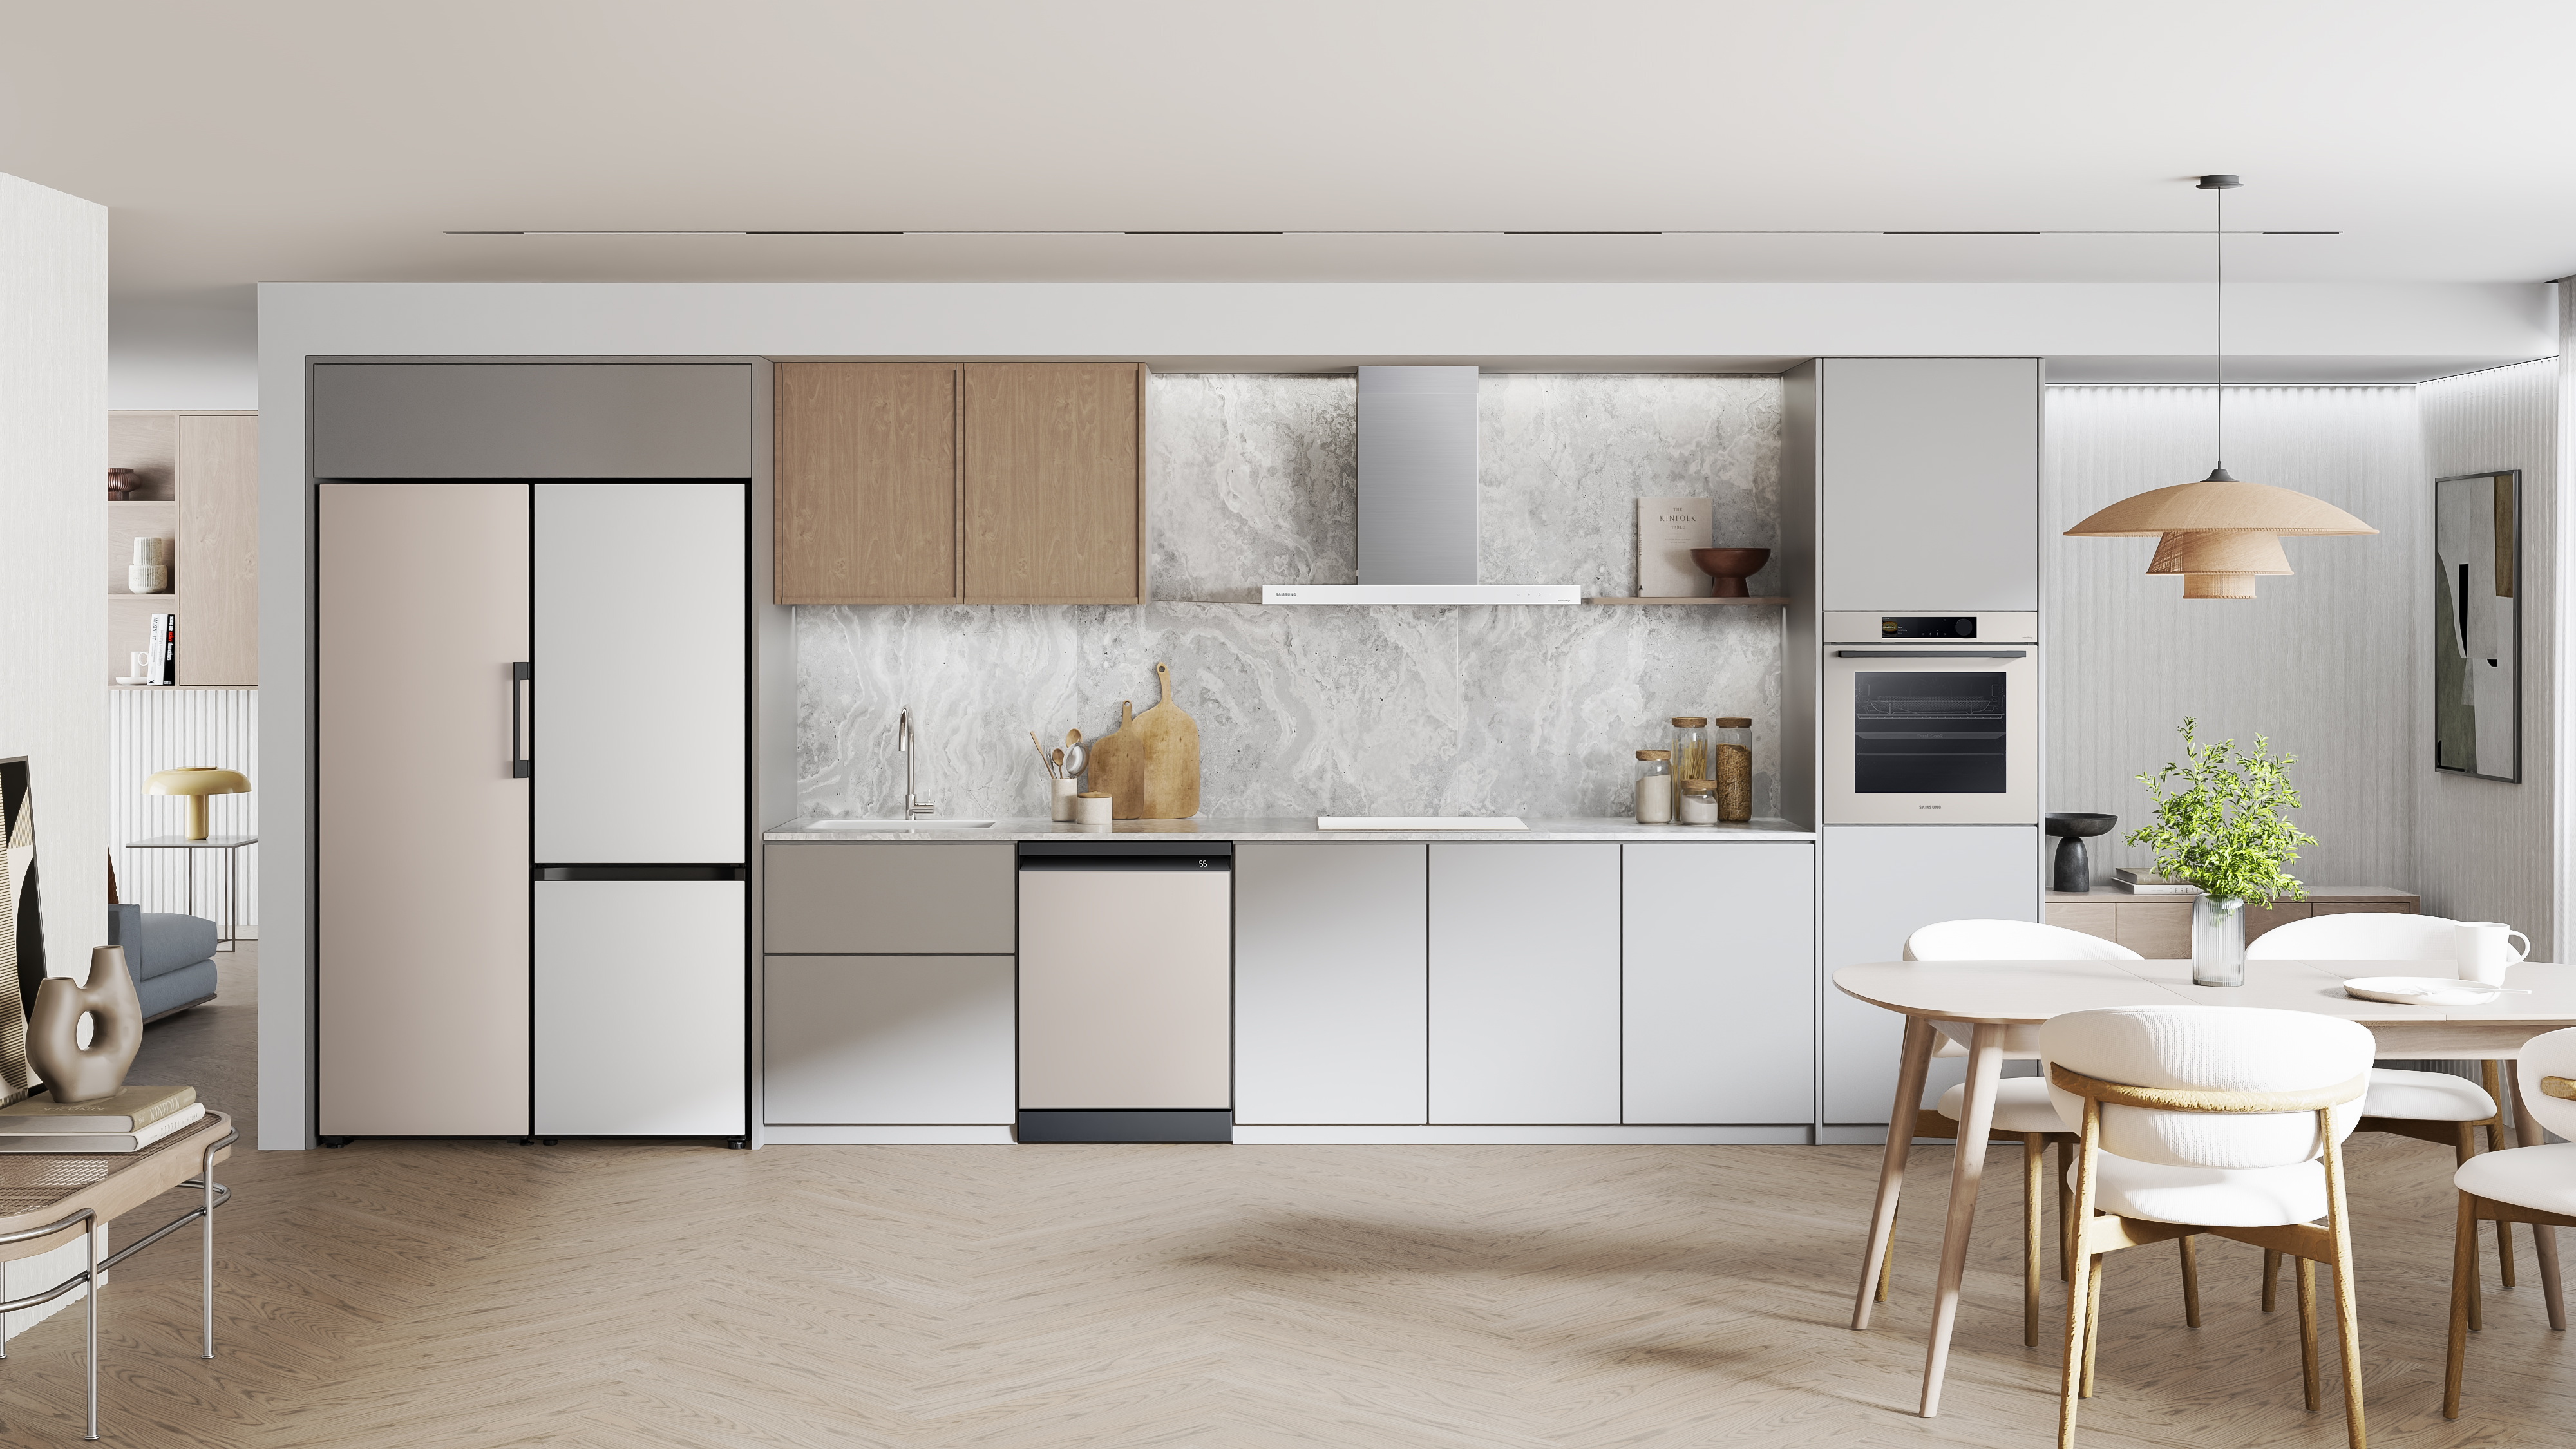 Design a culinary haven with Samsung Bespoke kitchen appliances.